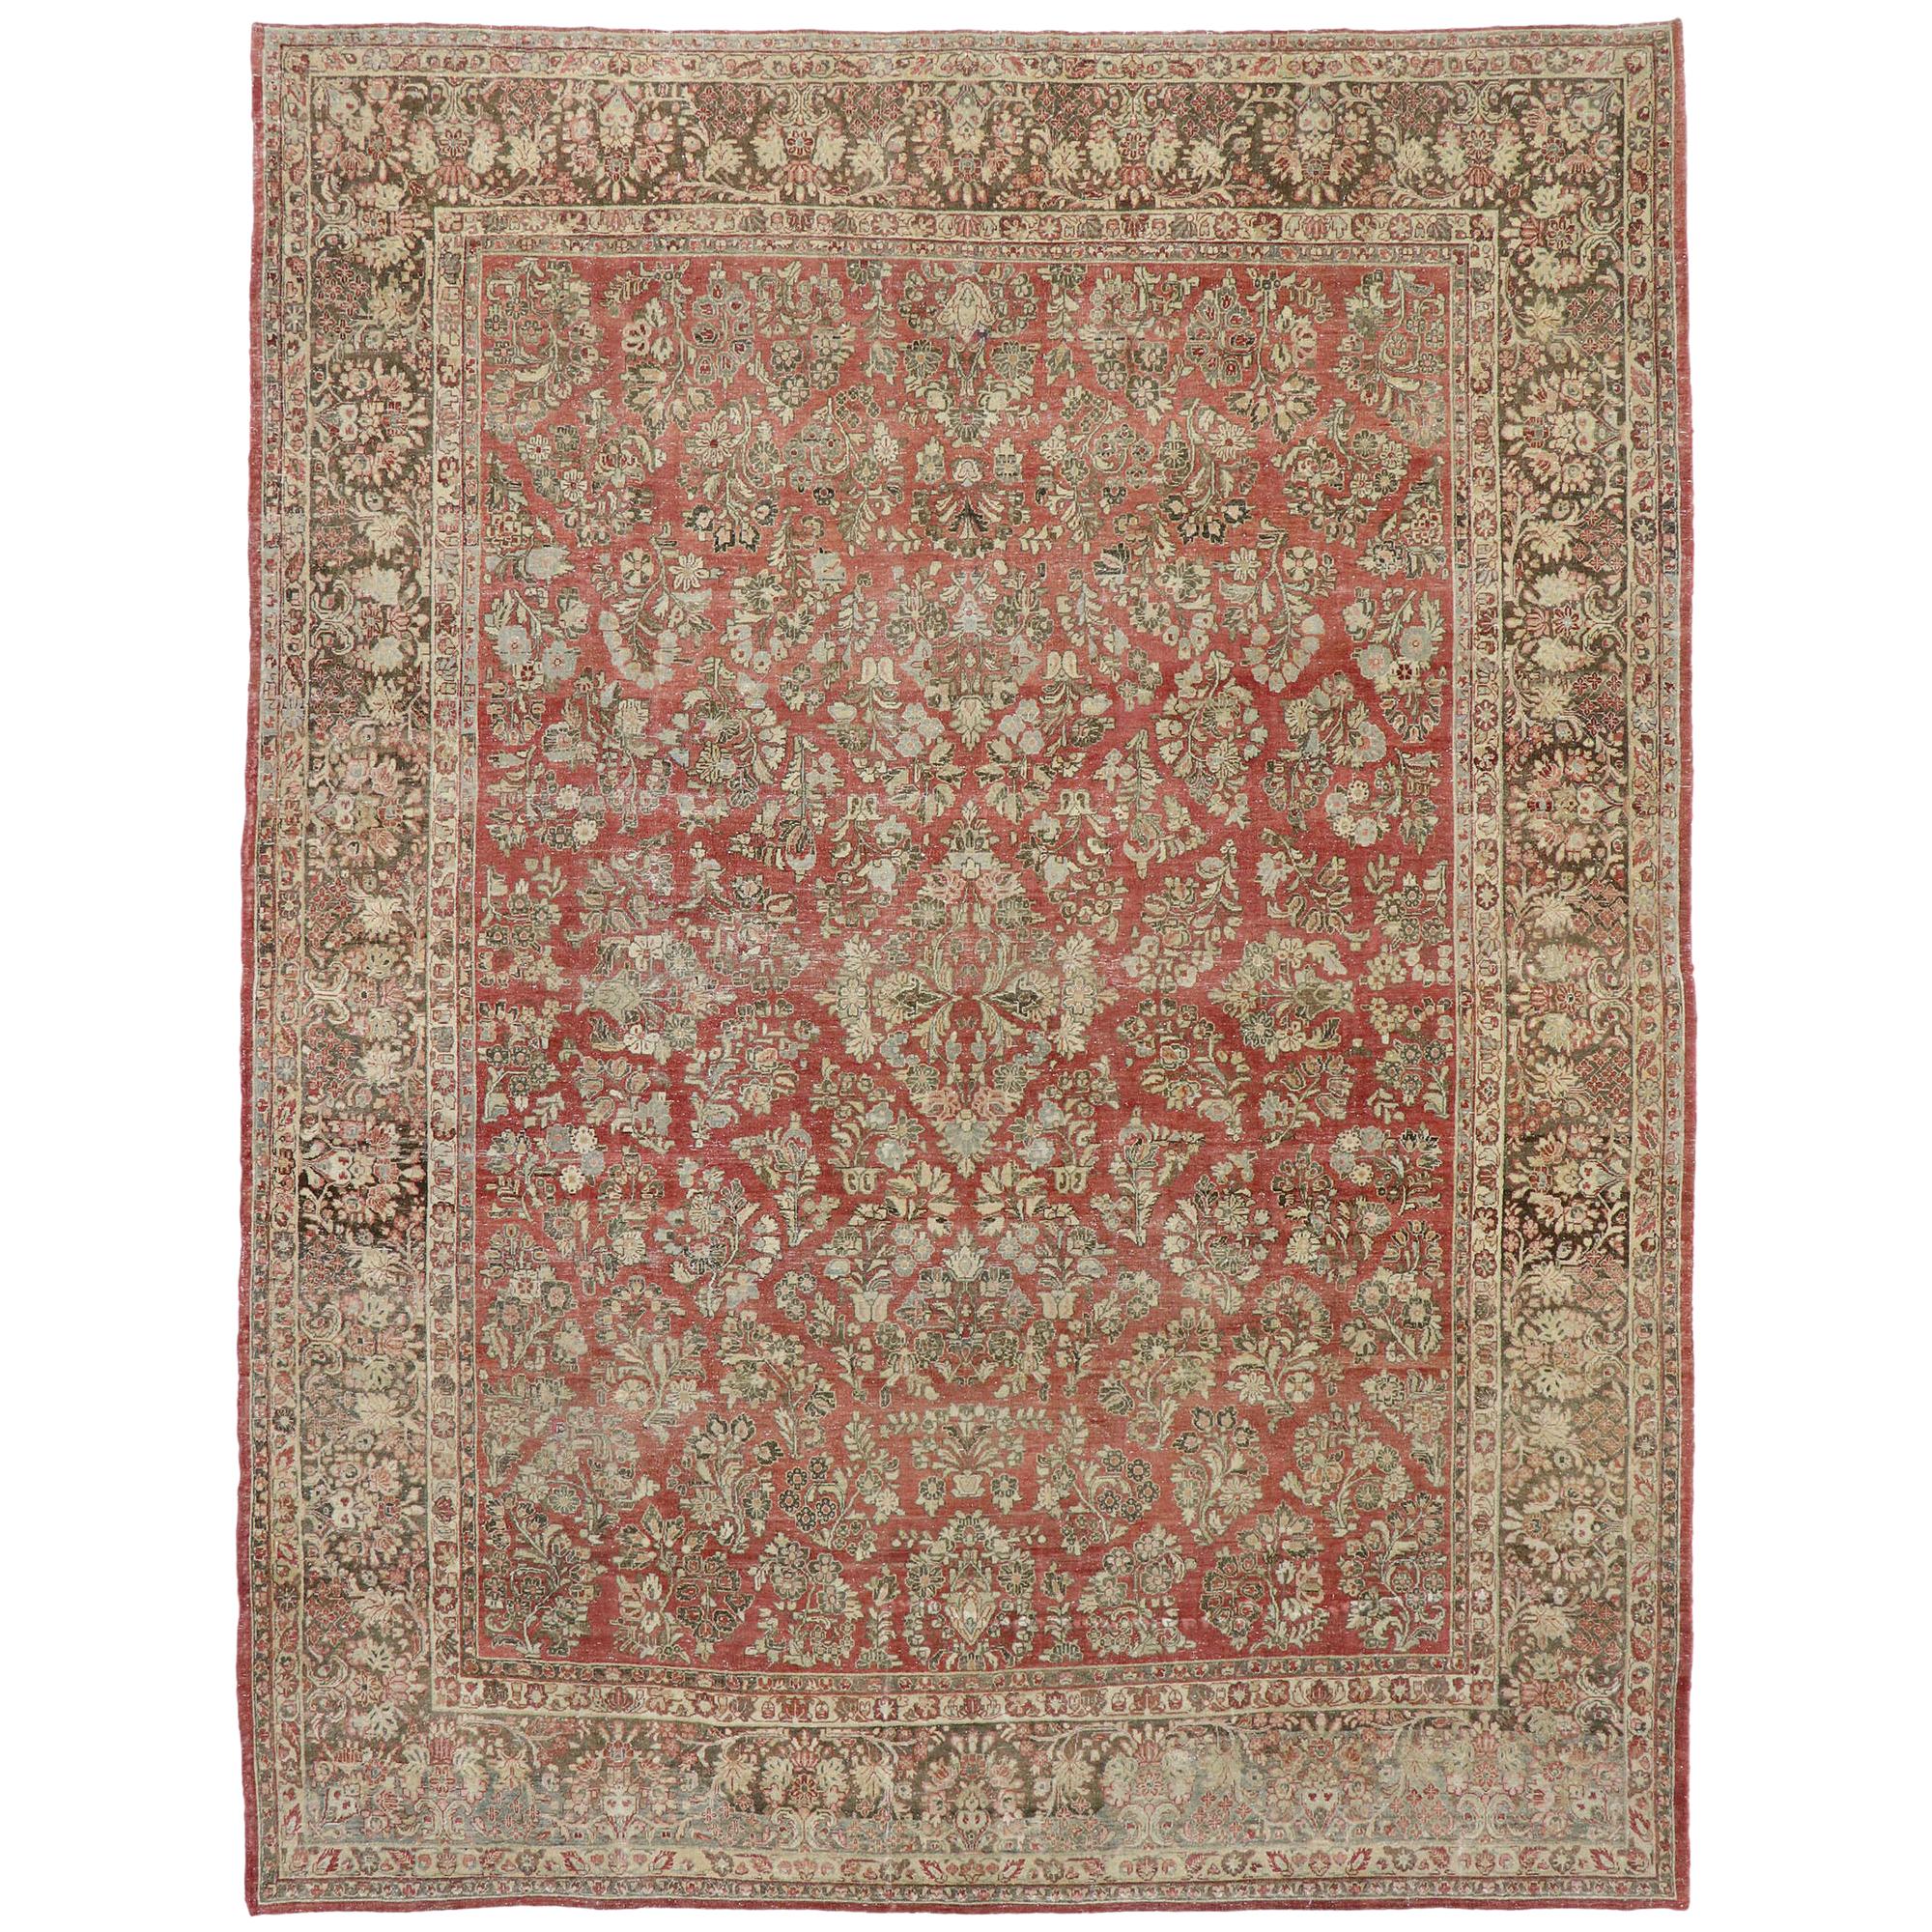 Distressed Antique Persian Sarouk Rug with Rustic American Traditional Style For Sale